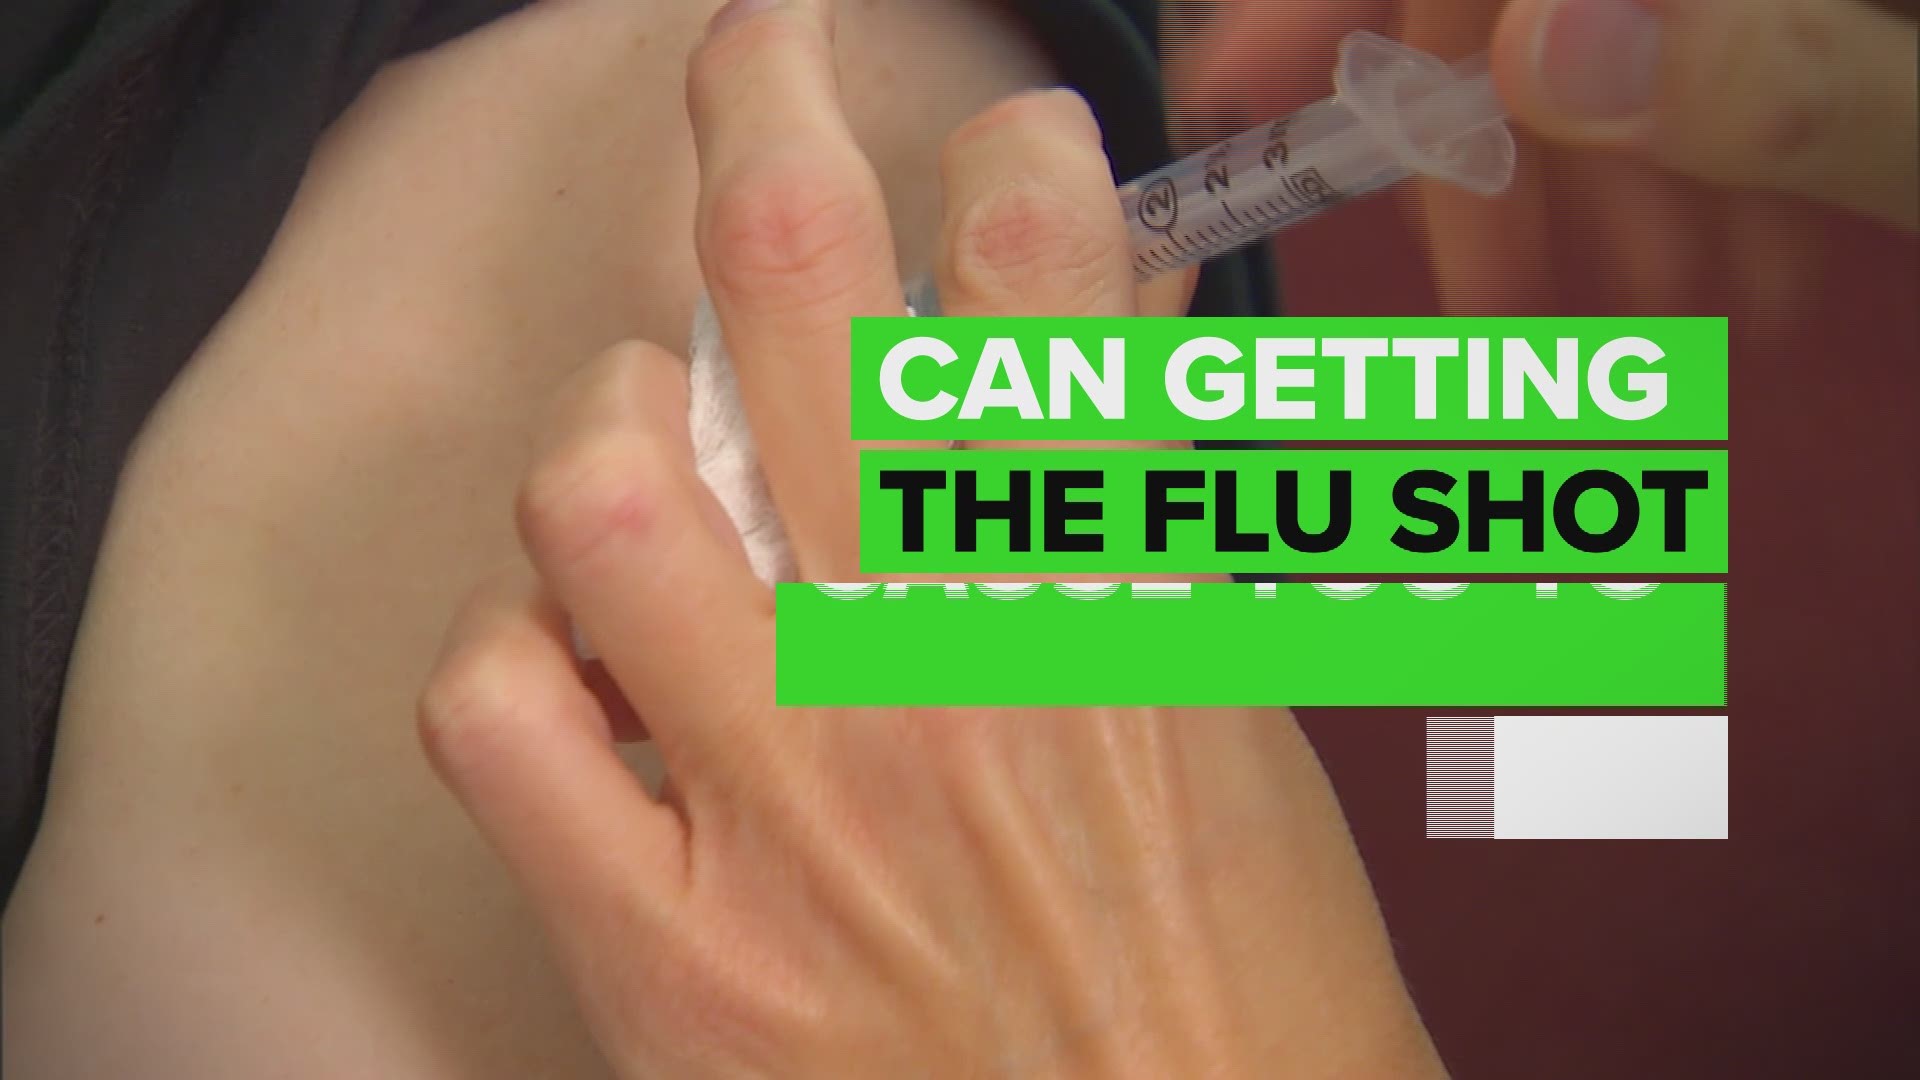 Viewers asked the VERIFY team to look into claims that the flu vaccine could trigger false positives.